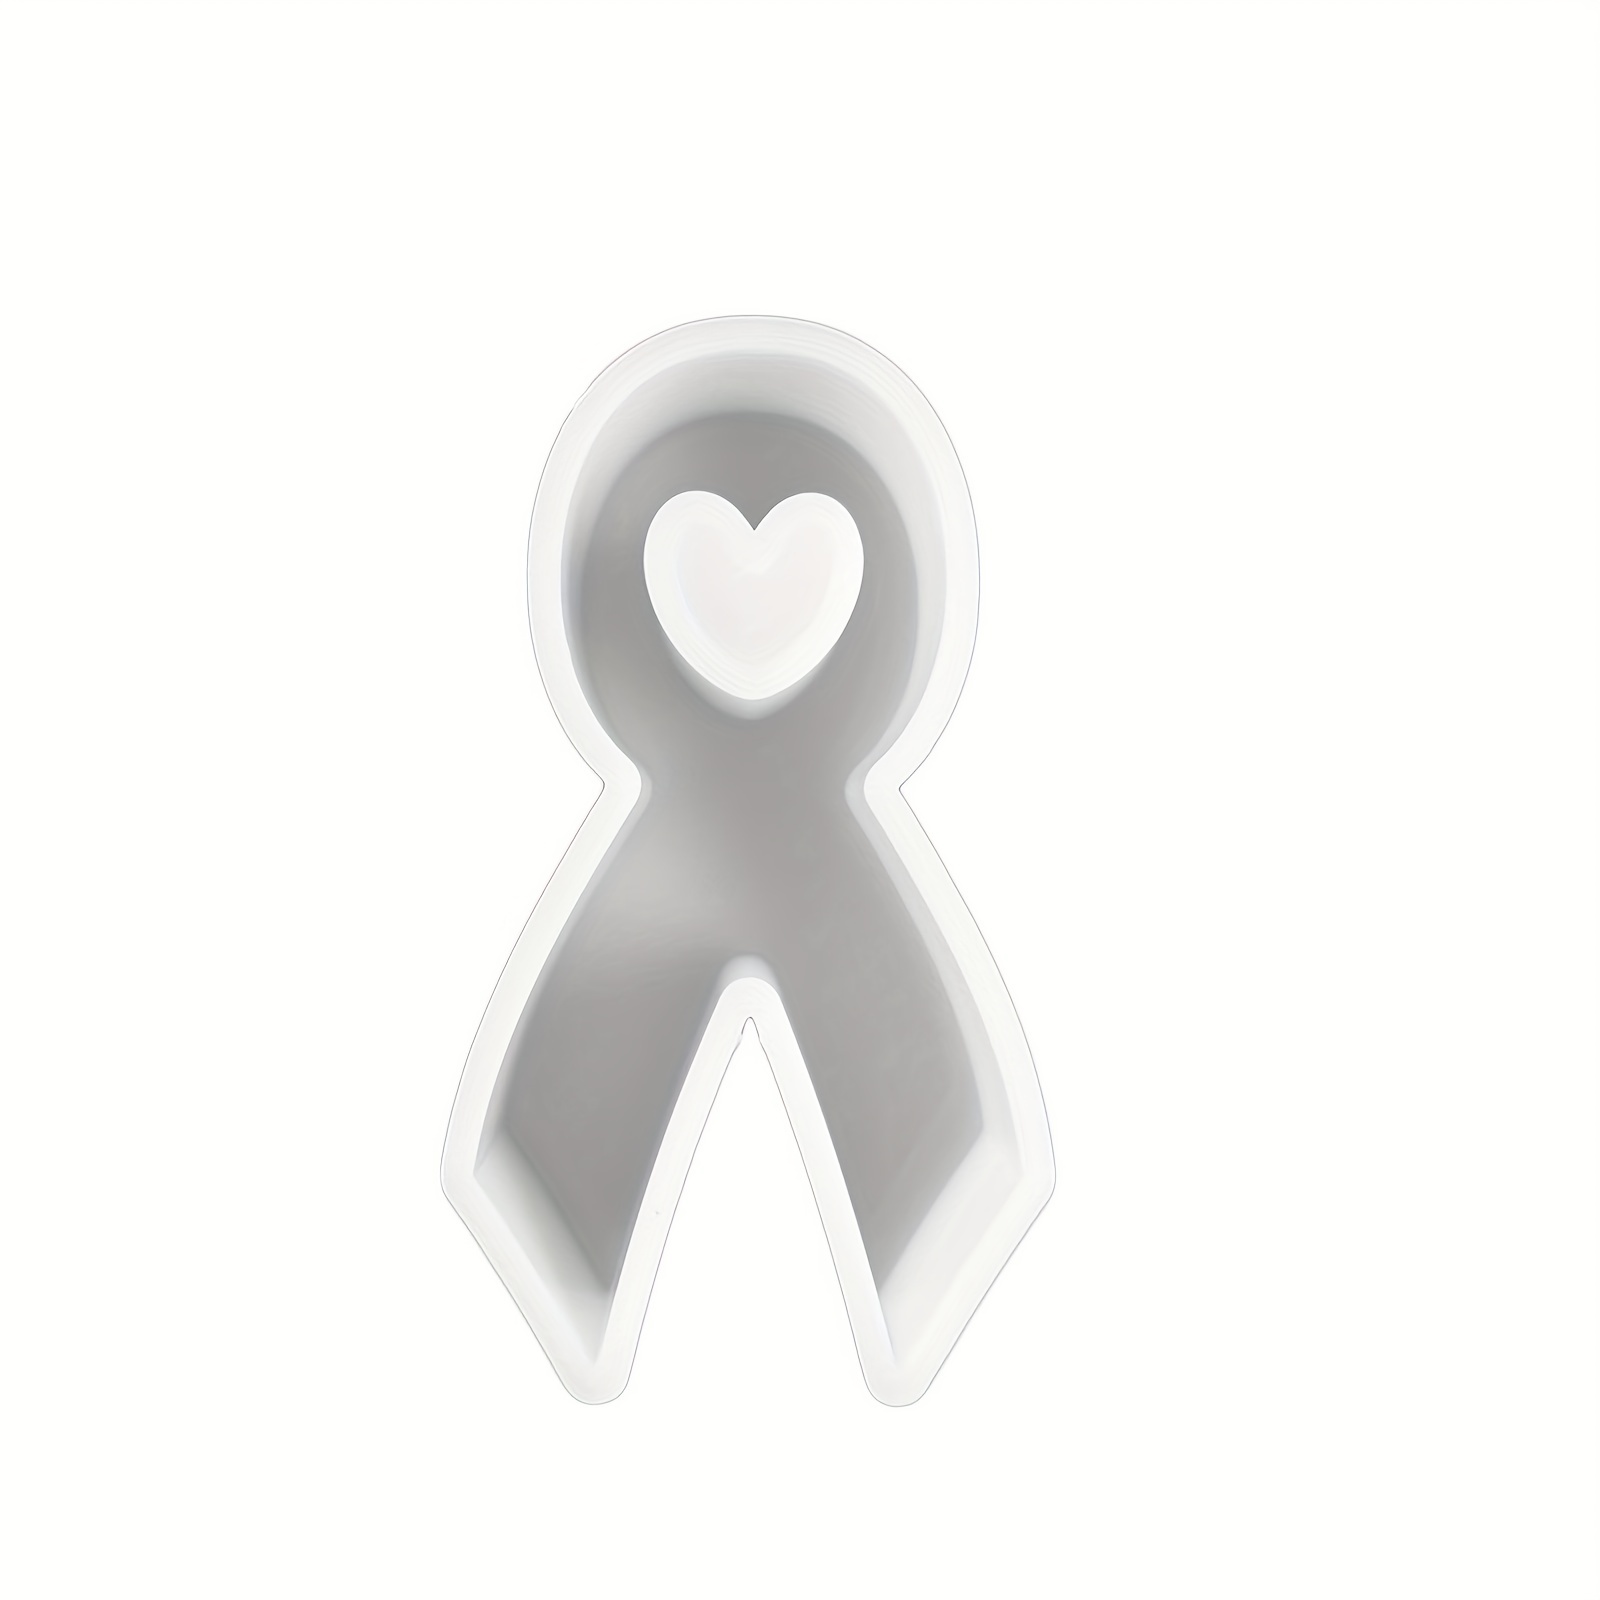 Black Awareness Ribbon With White Candle On White Background